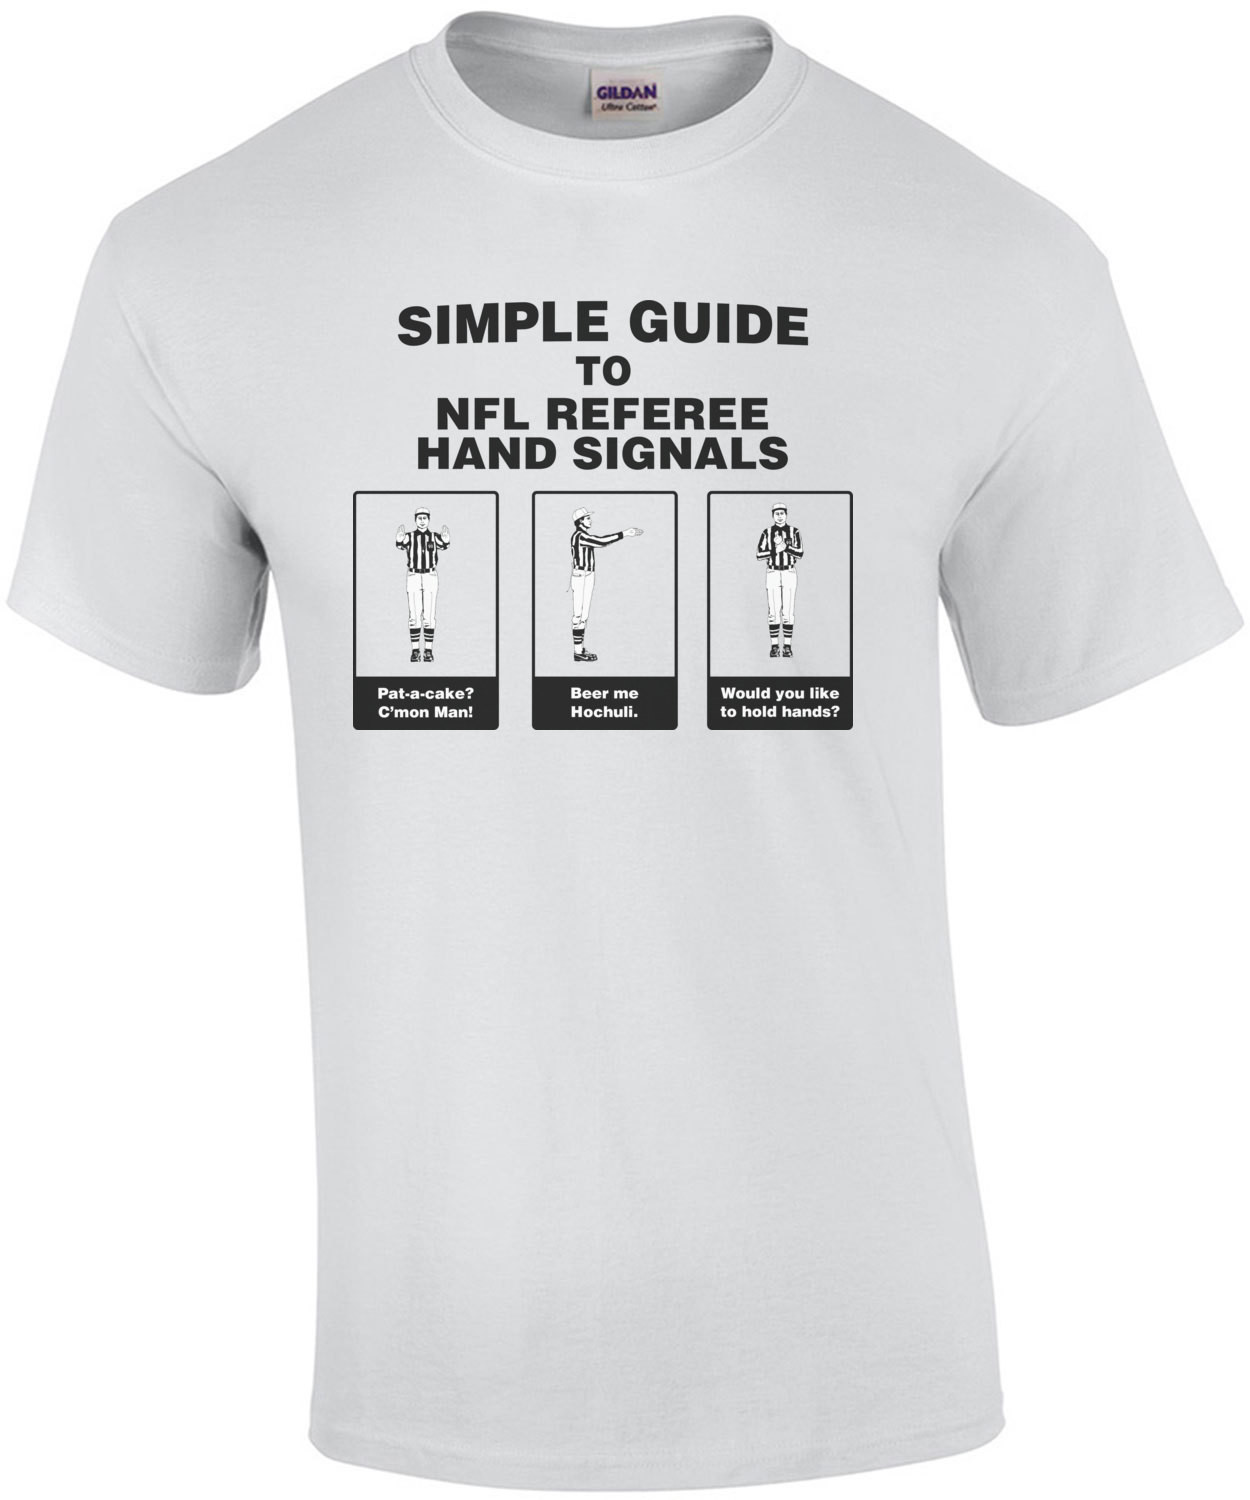 Simple Guide To NFL Hand Signals Shirt